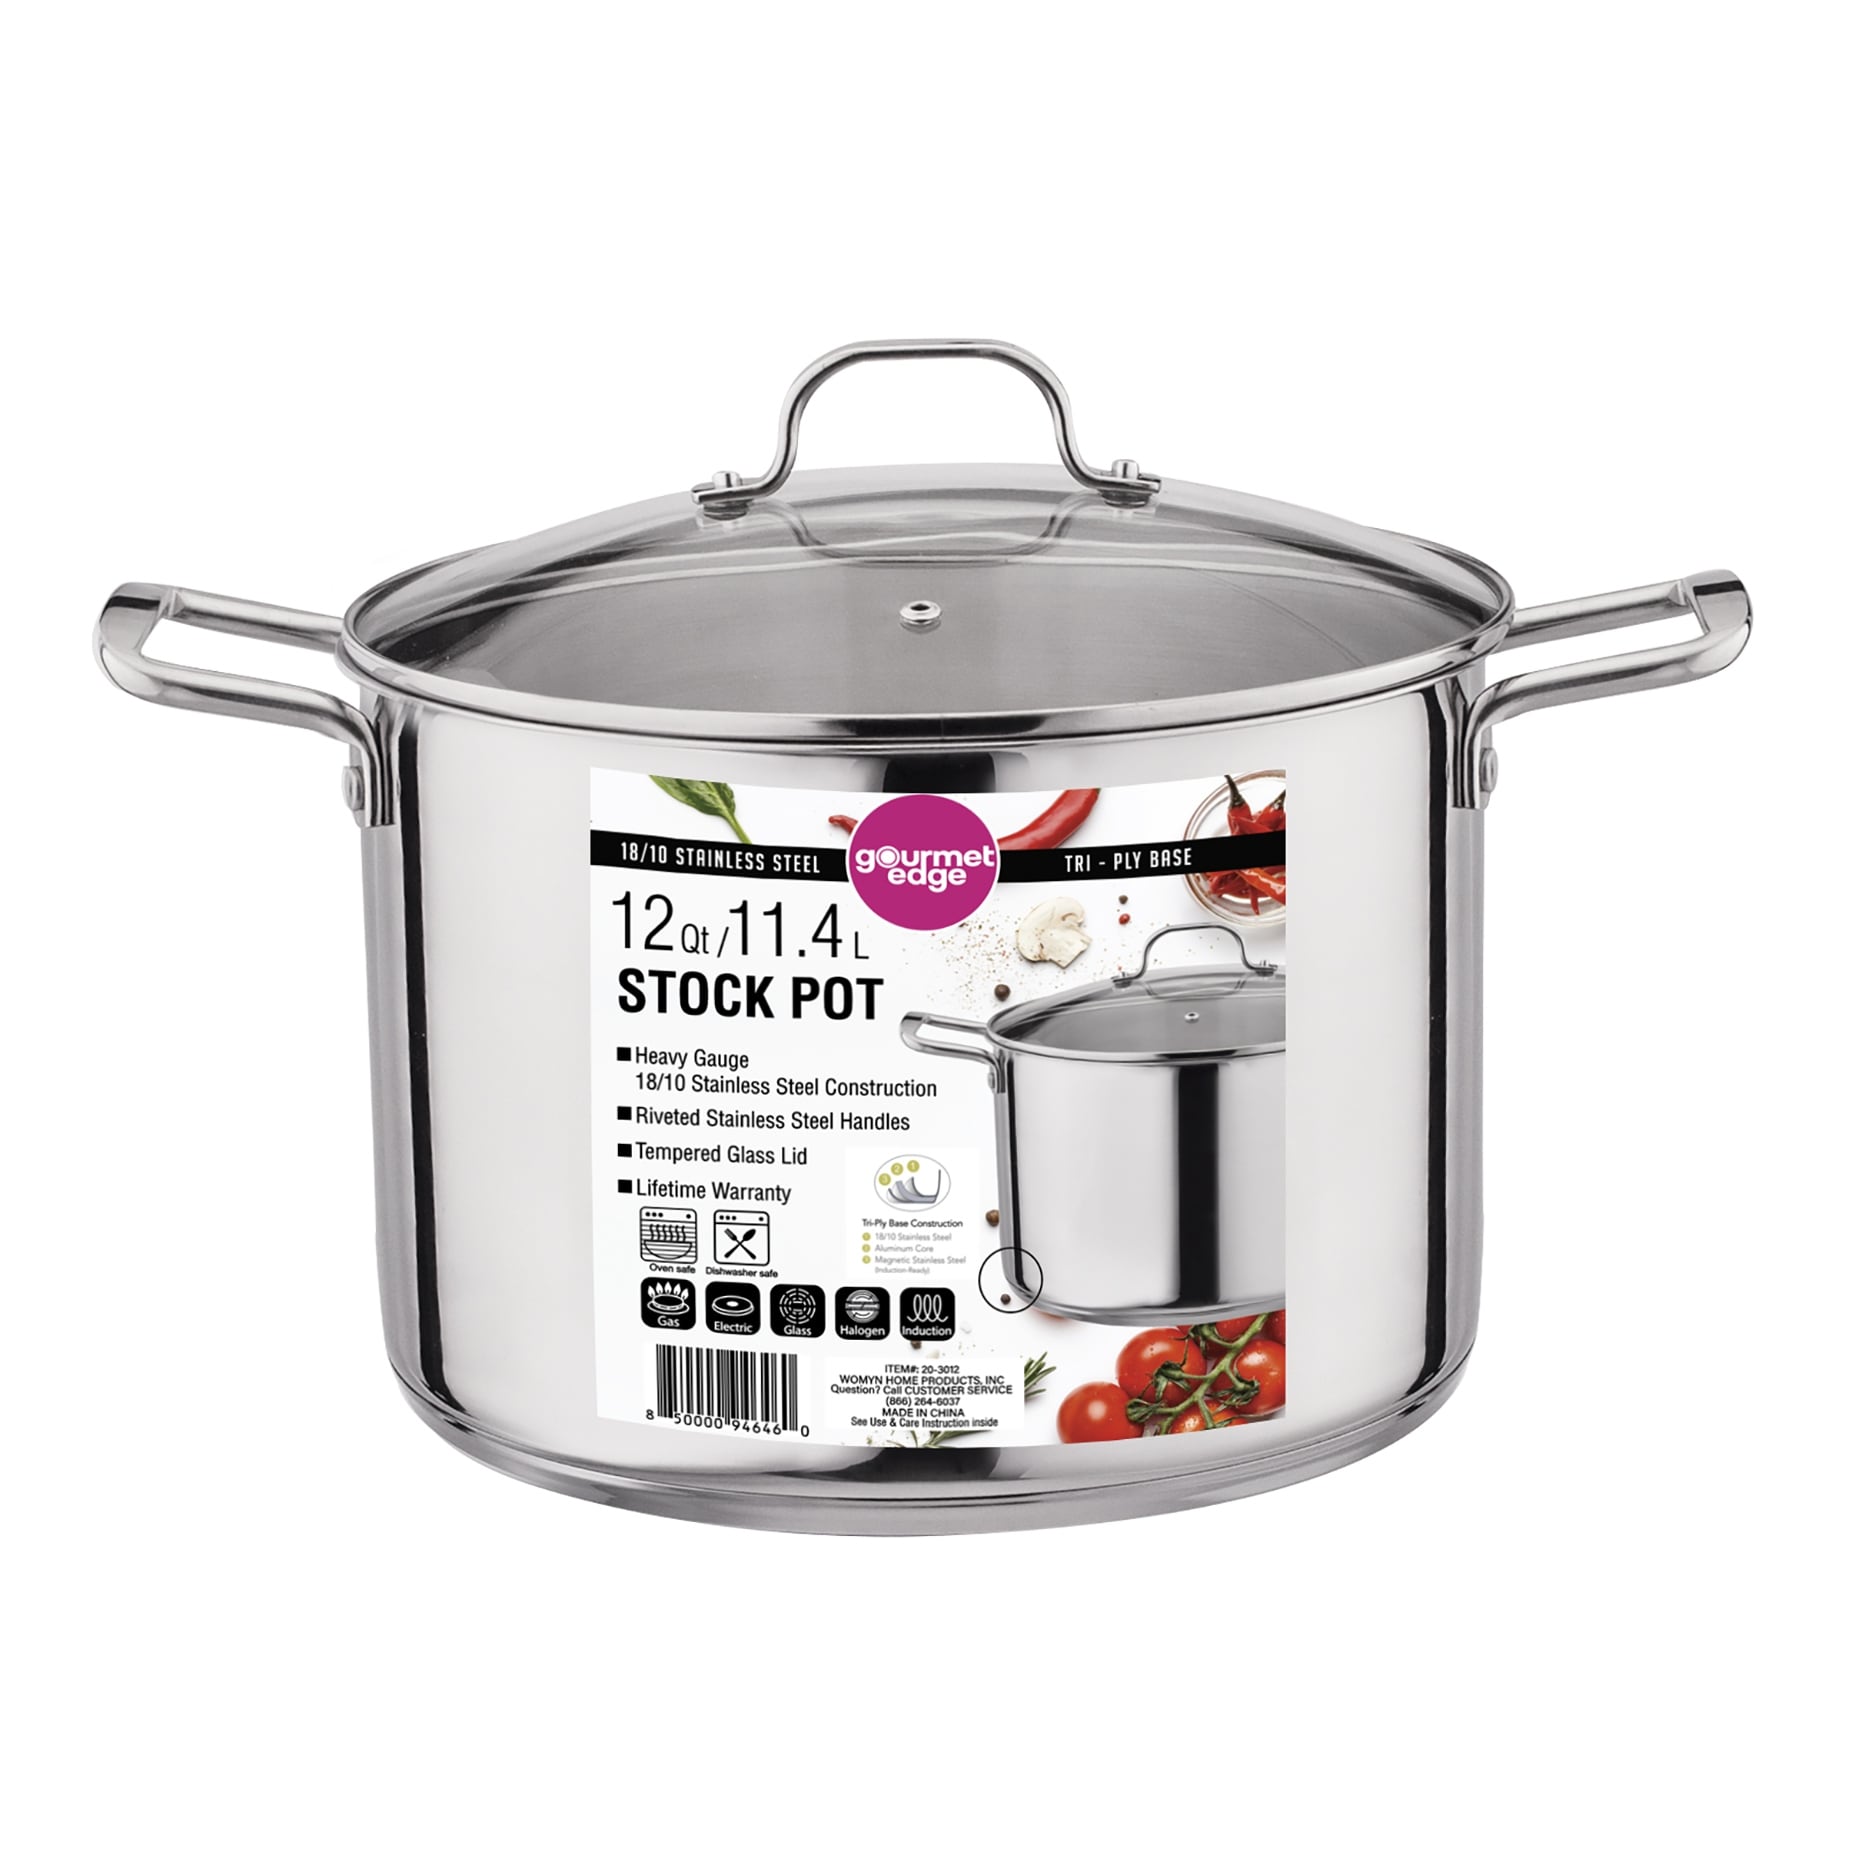 Classic Farberware 18/10 Stainless Steel 6 Quart Stock Pot with